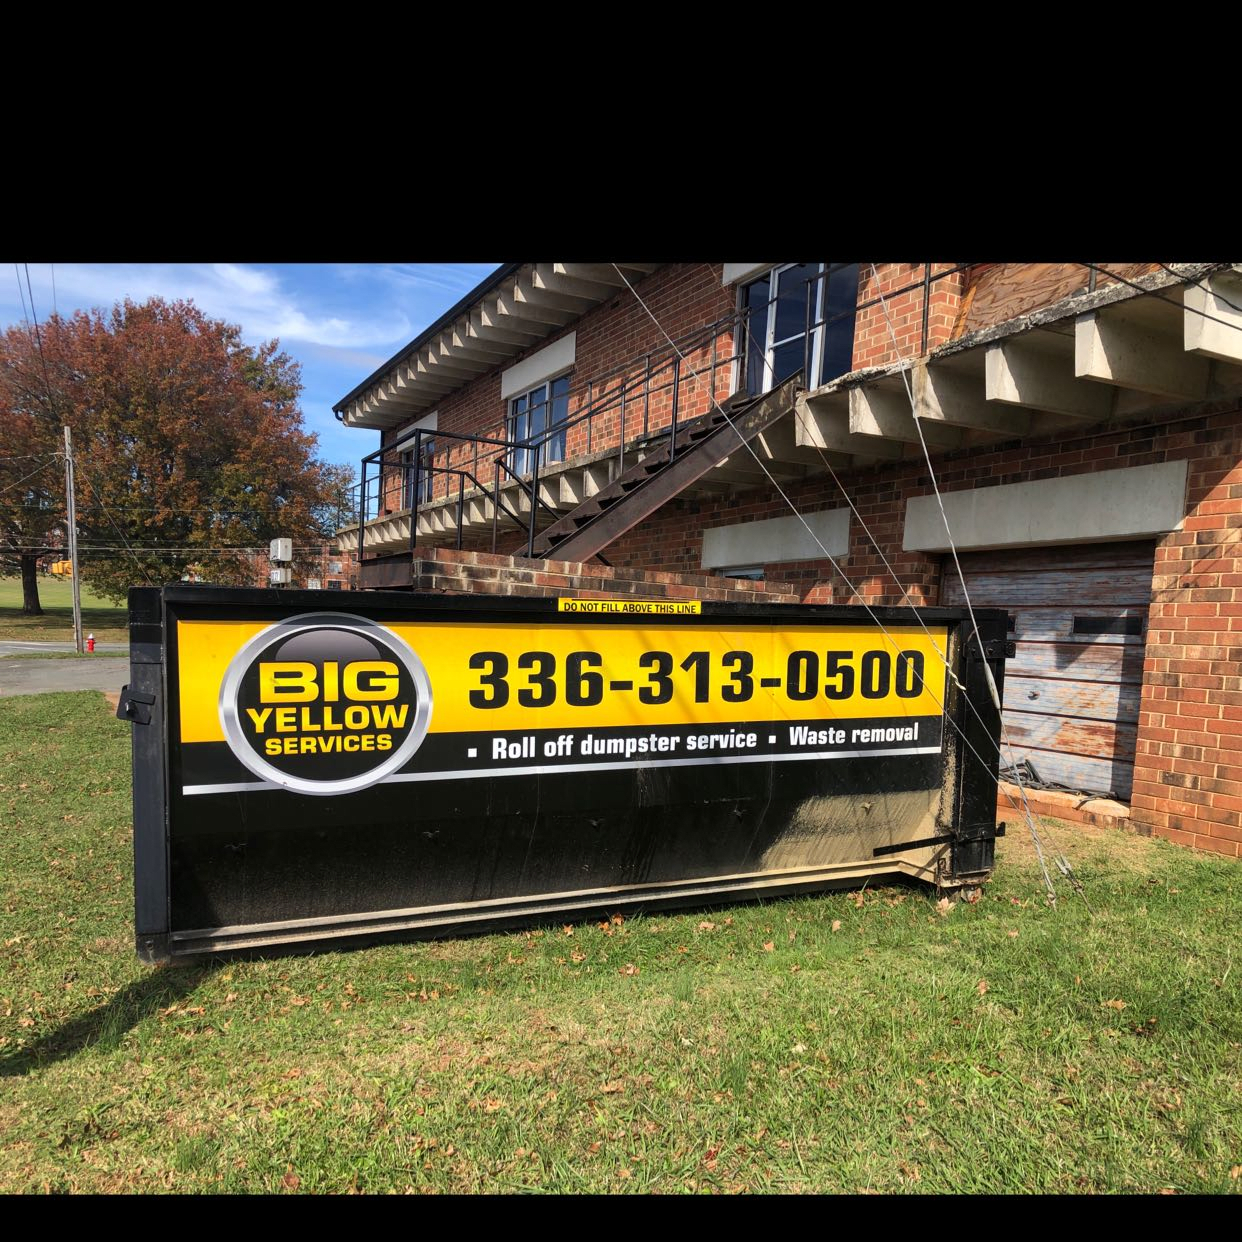 Burlington, NC 27215 dumpster rental service near me 11-5-2020 Terms of Use | Roll-Off Dumpster Rentals | Big Yellow Services